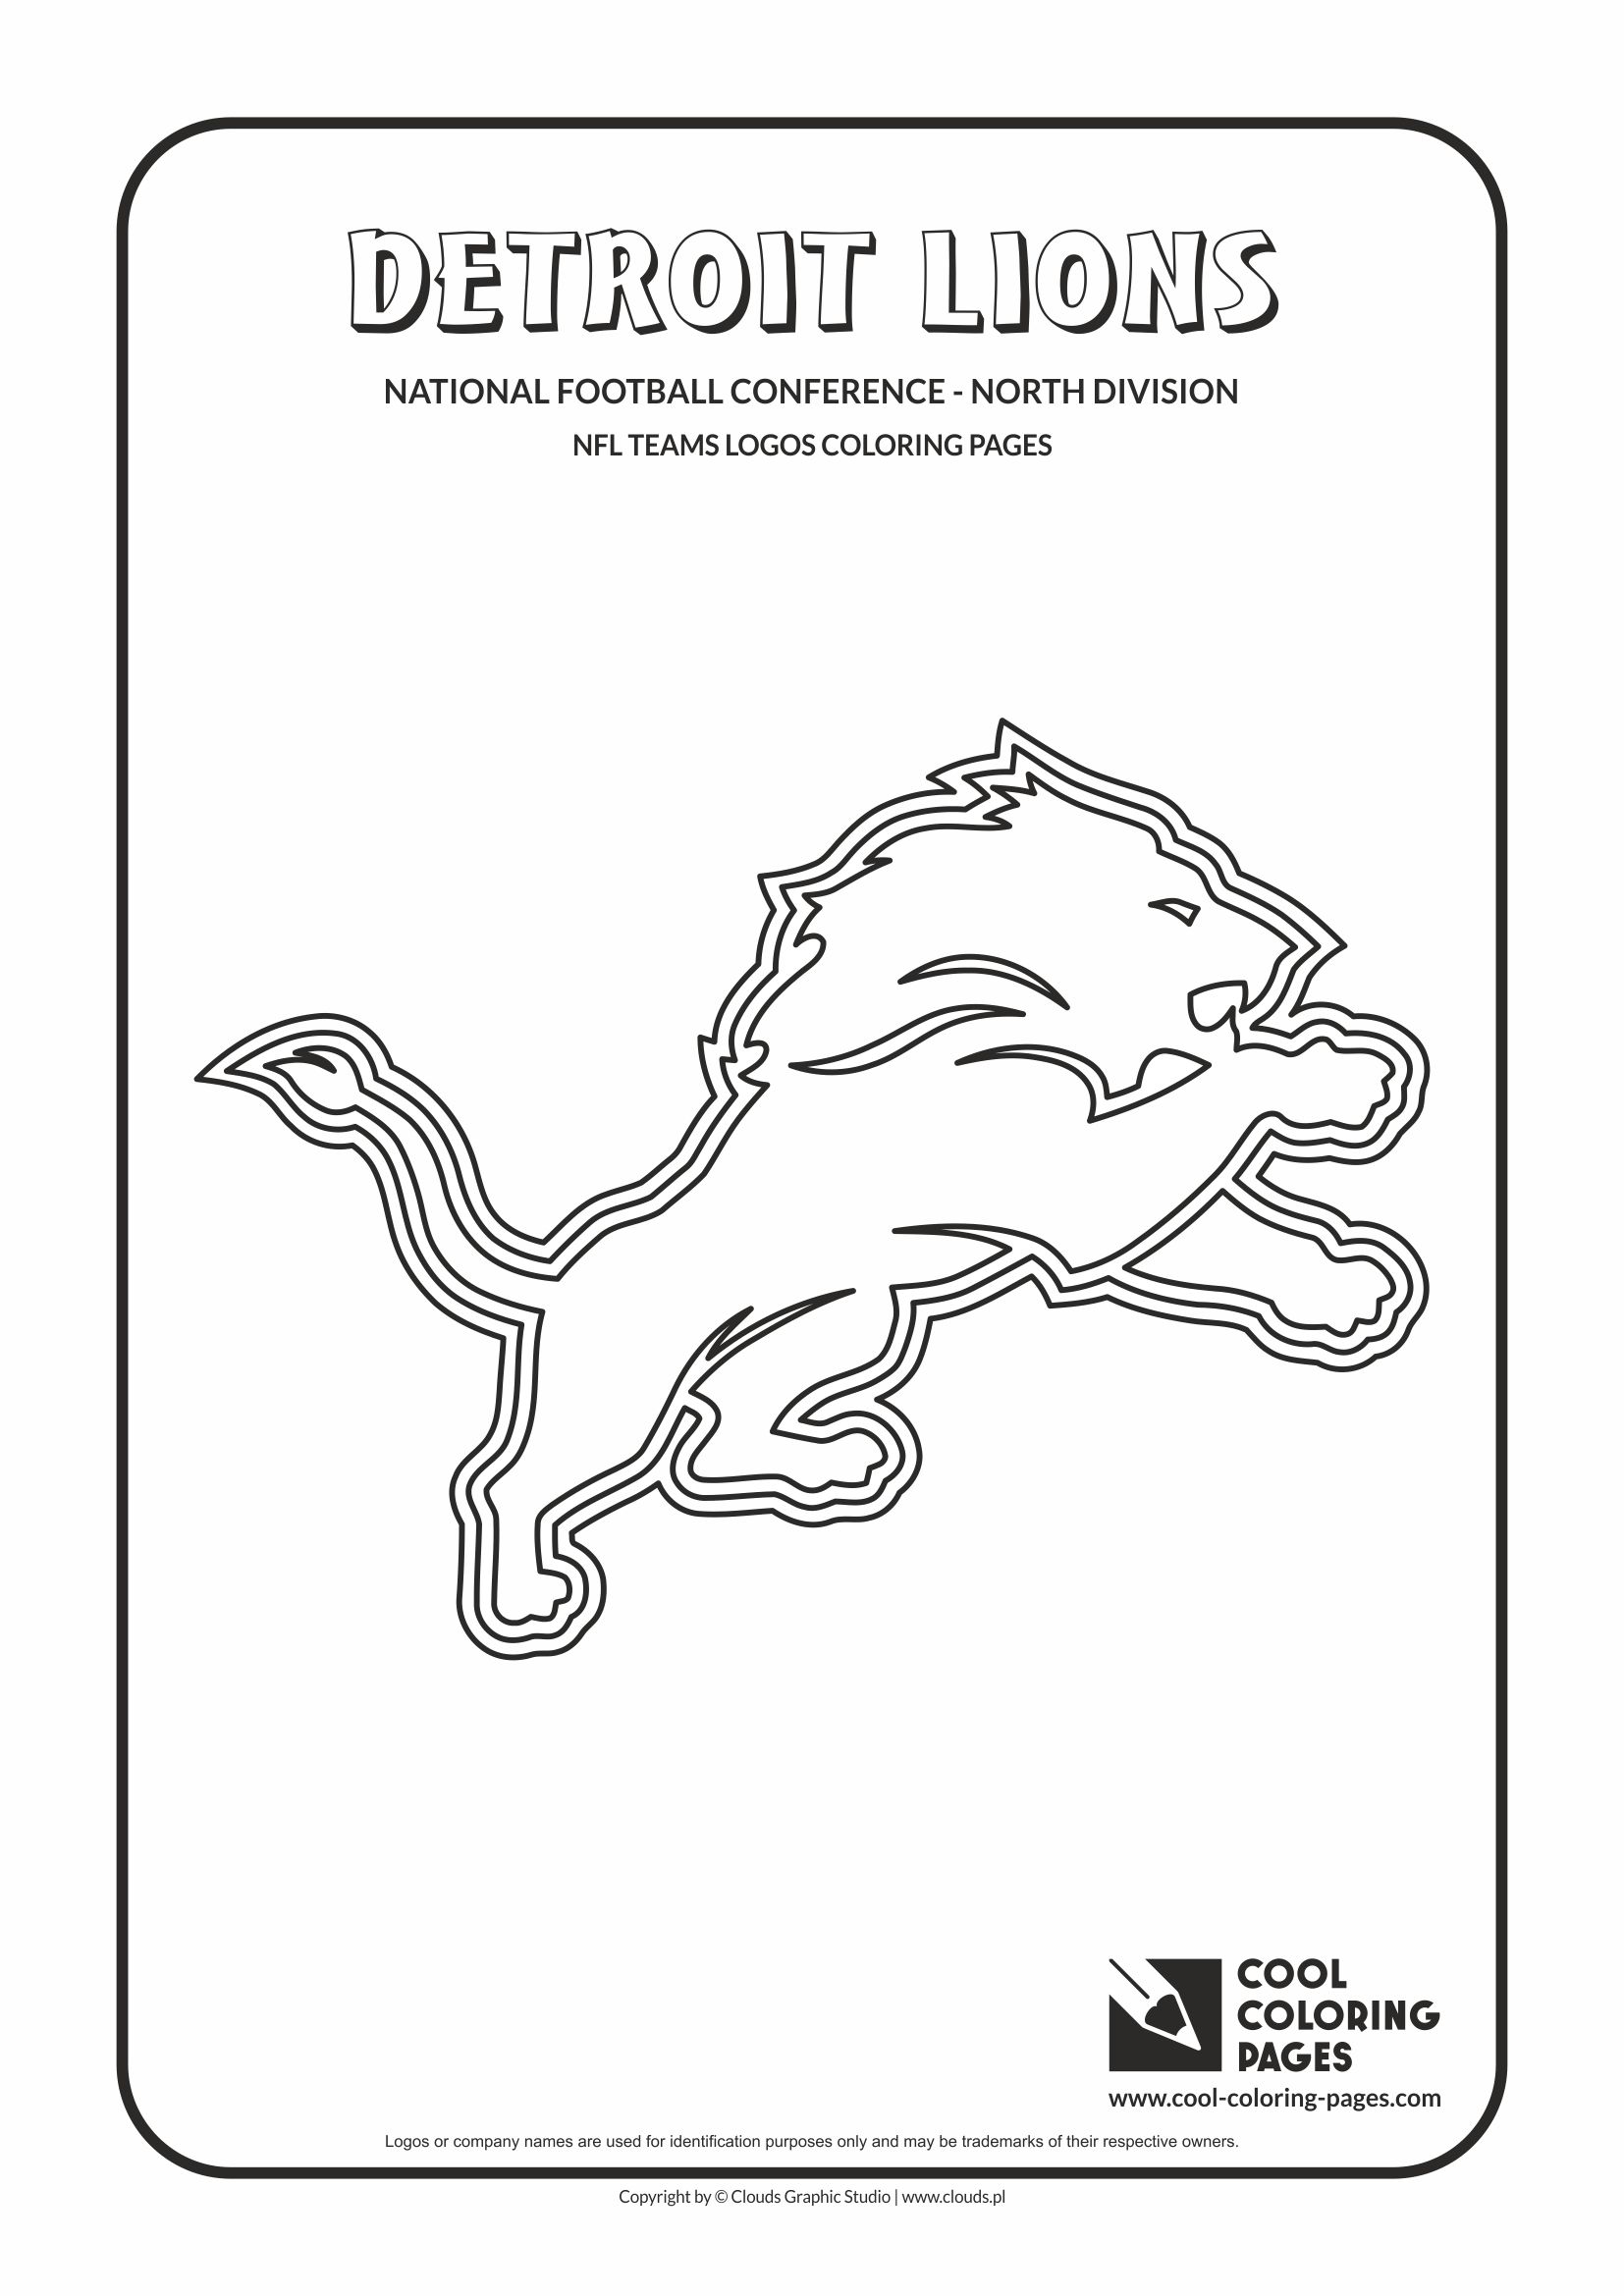 Cool Coloring Pages - NFL American Football Clubs Logos - National Football Conference - North Division / Detroit Lions logo / Coloring page with Detroit Lions logo